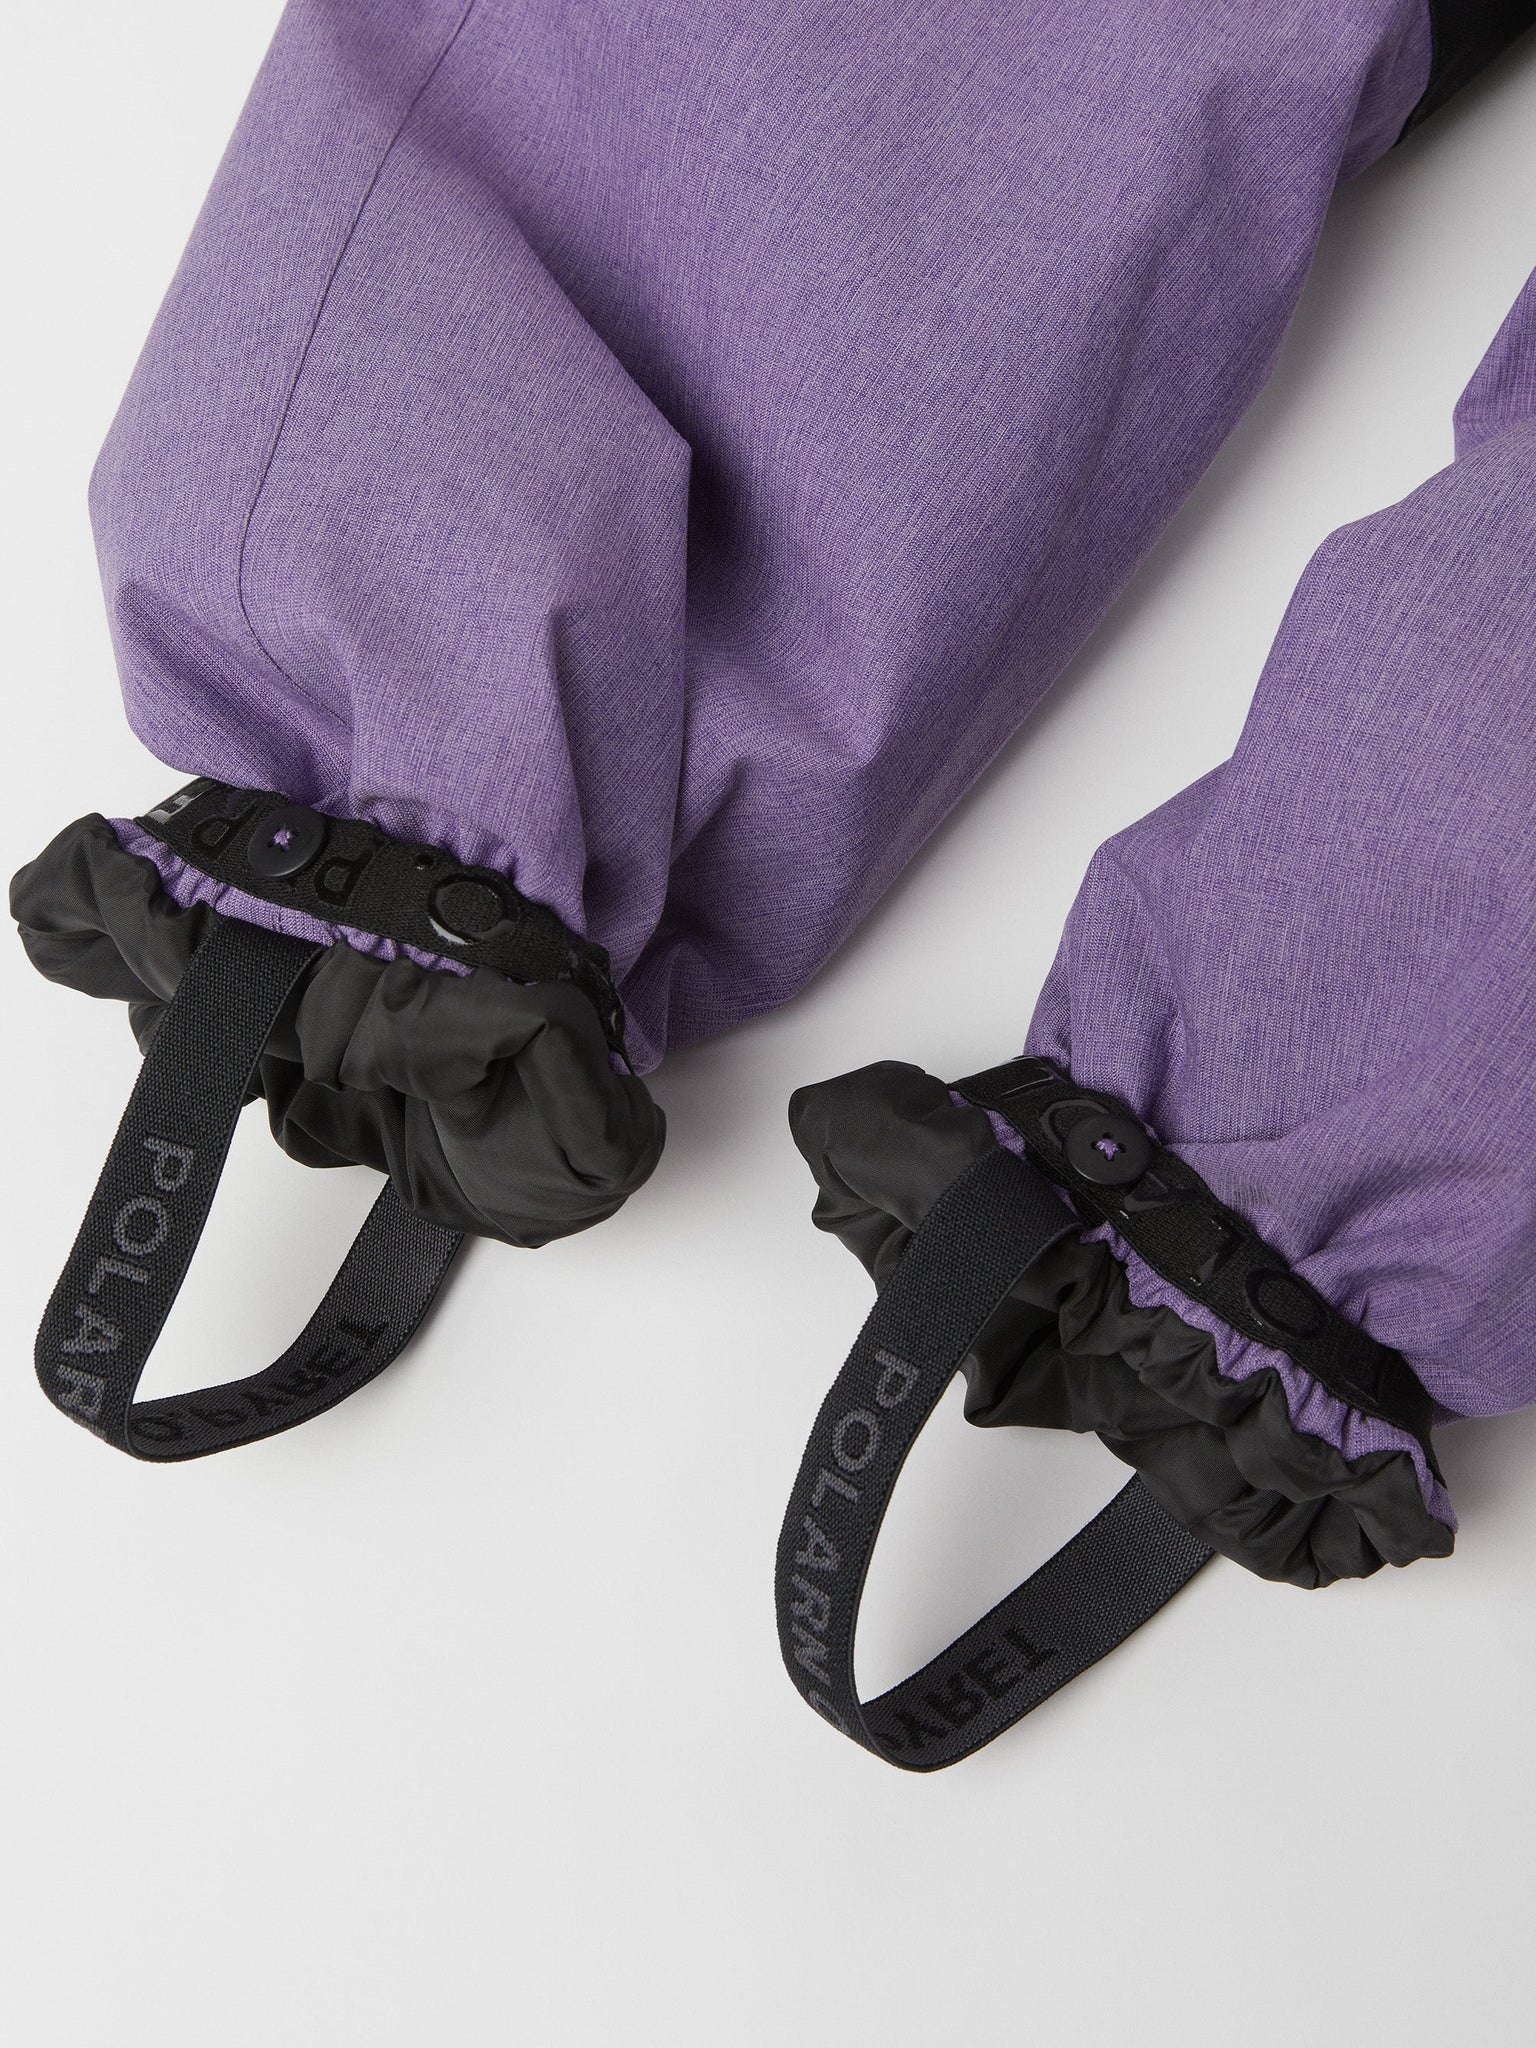 Purple Kids Padded Waterproof Overall from the Polarn O. Pyret outerwear collection. Kids outerwear made from sustainably source materials